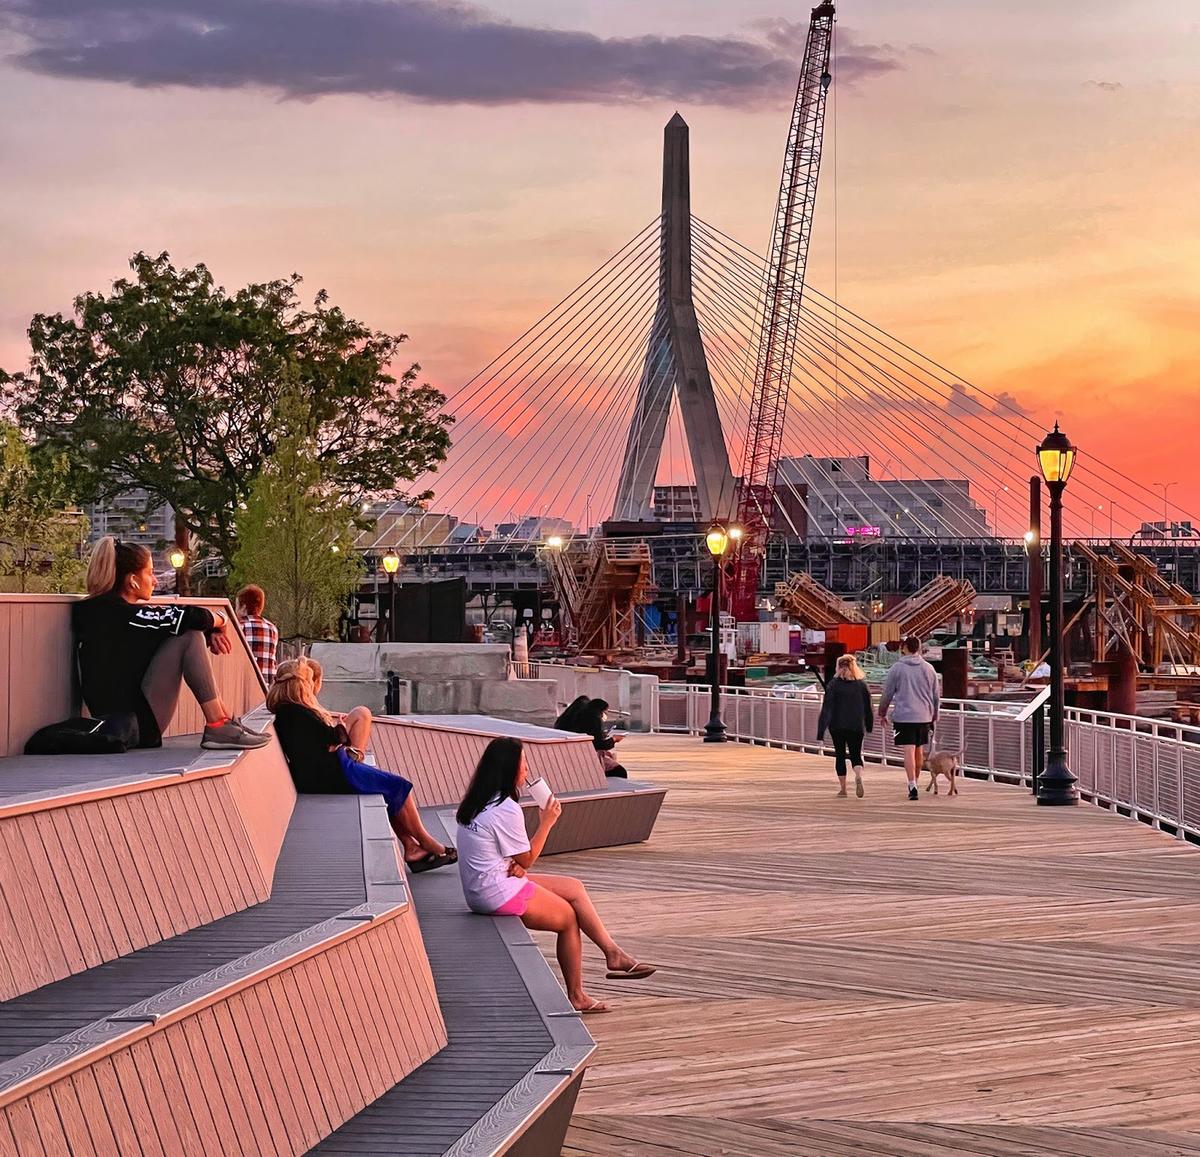 Park users enjoy the recently-renovated Langone Park and Puopolo Playground complex on Boston’s historic waterfront built with an eye to the future by incorporating climate resilient features.